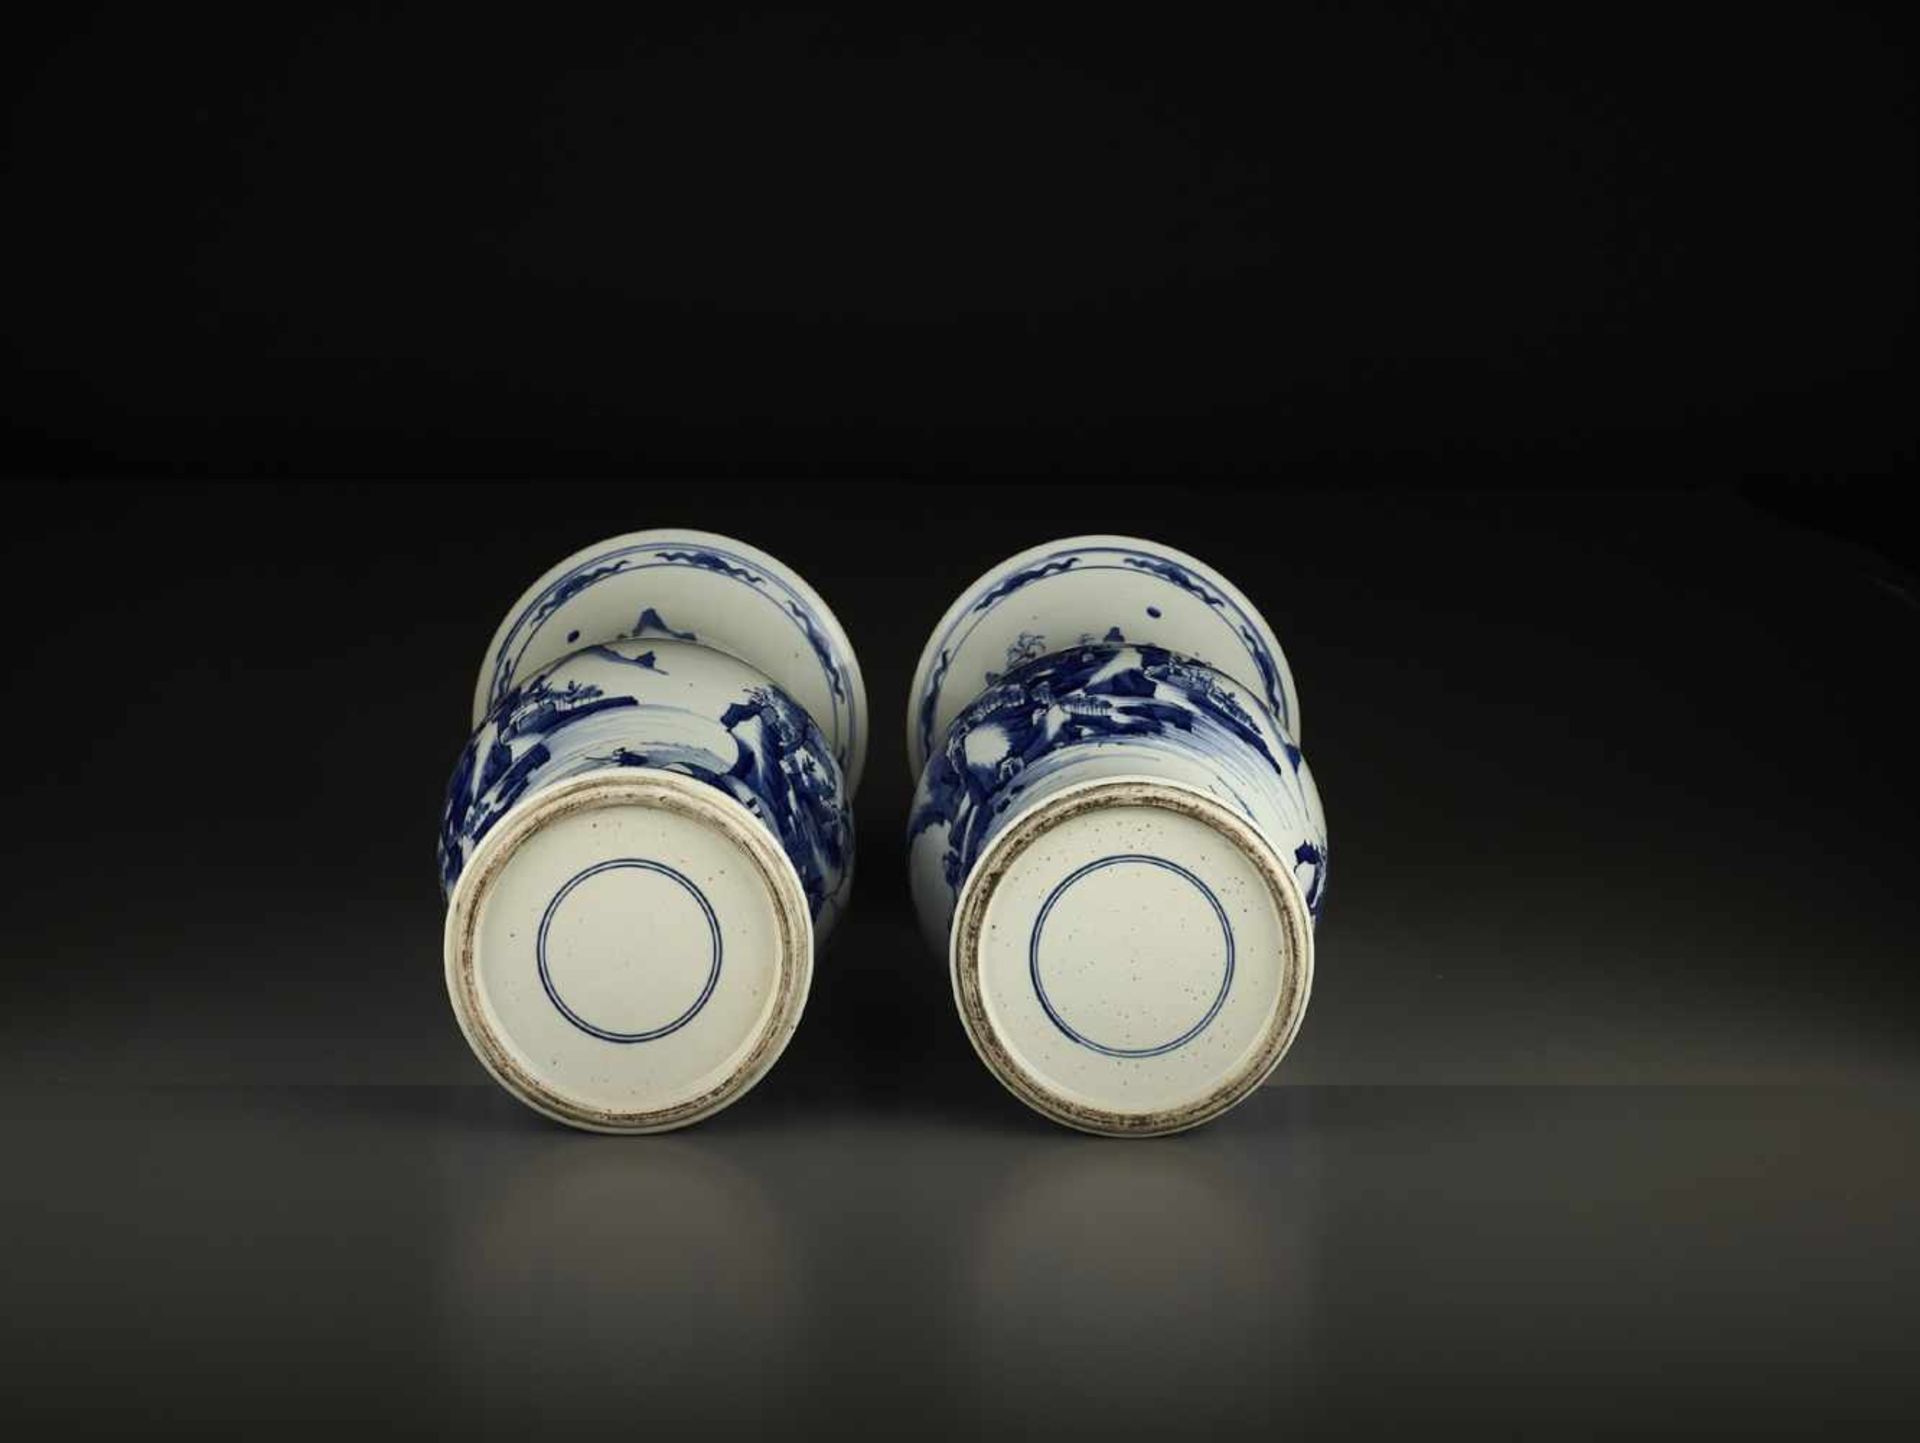 A PAIR OF BLUE AND WHITE YEN YEN VASES, LATE QING OR REPUBLIC - Image 6 of 6